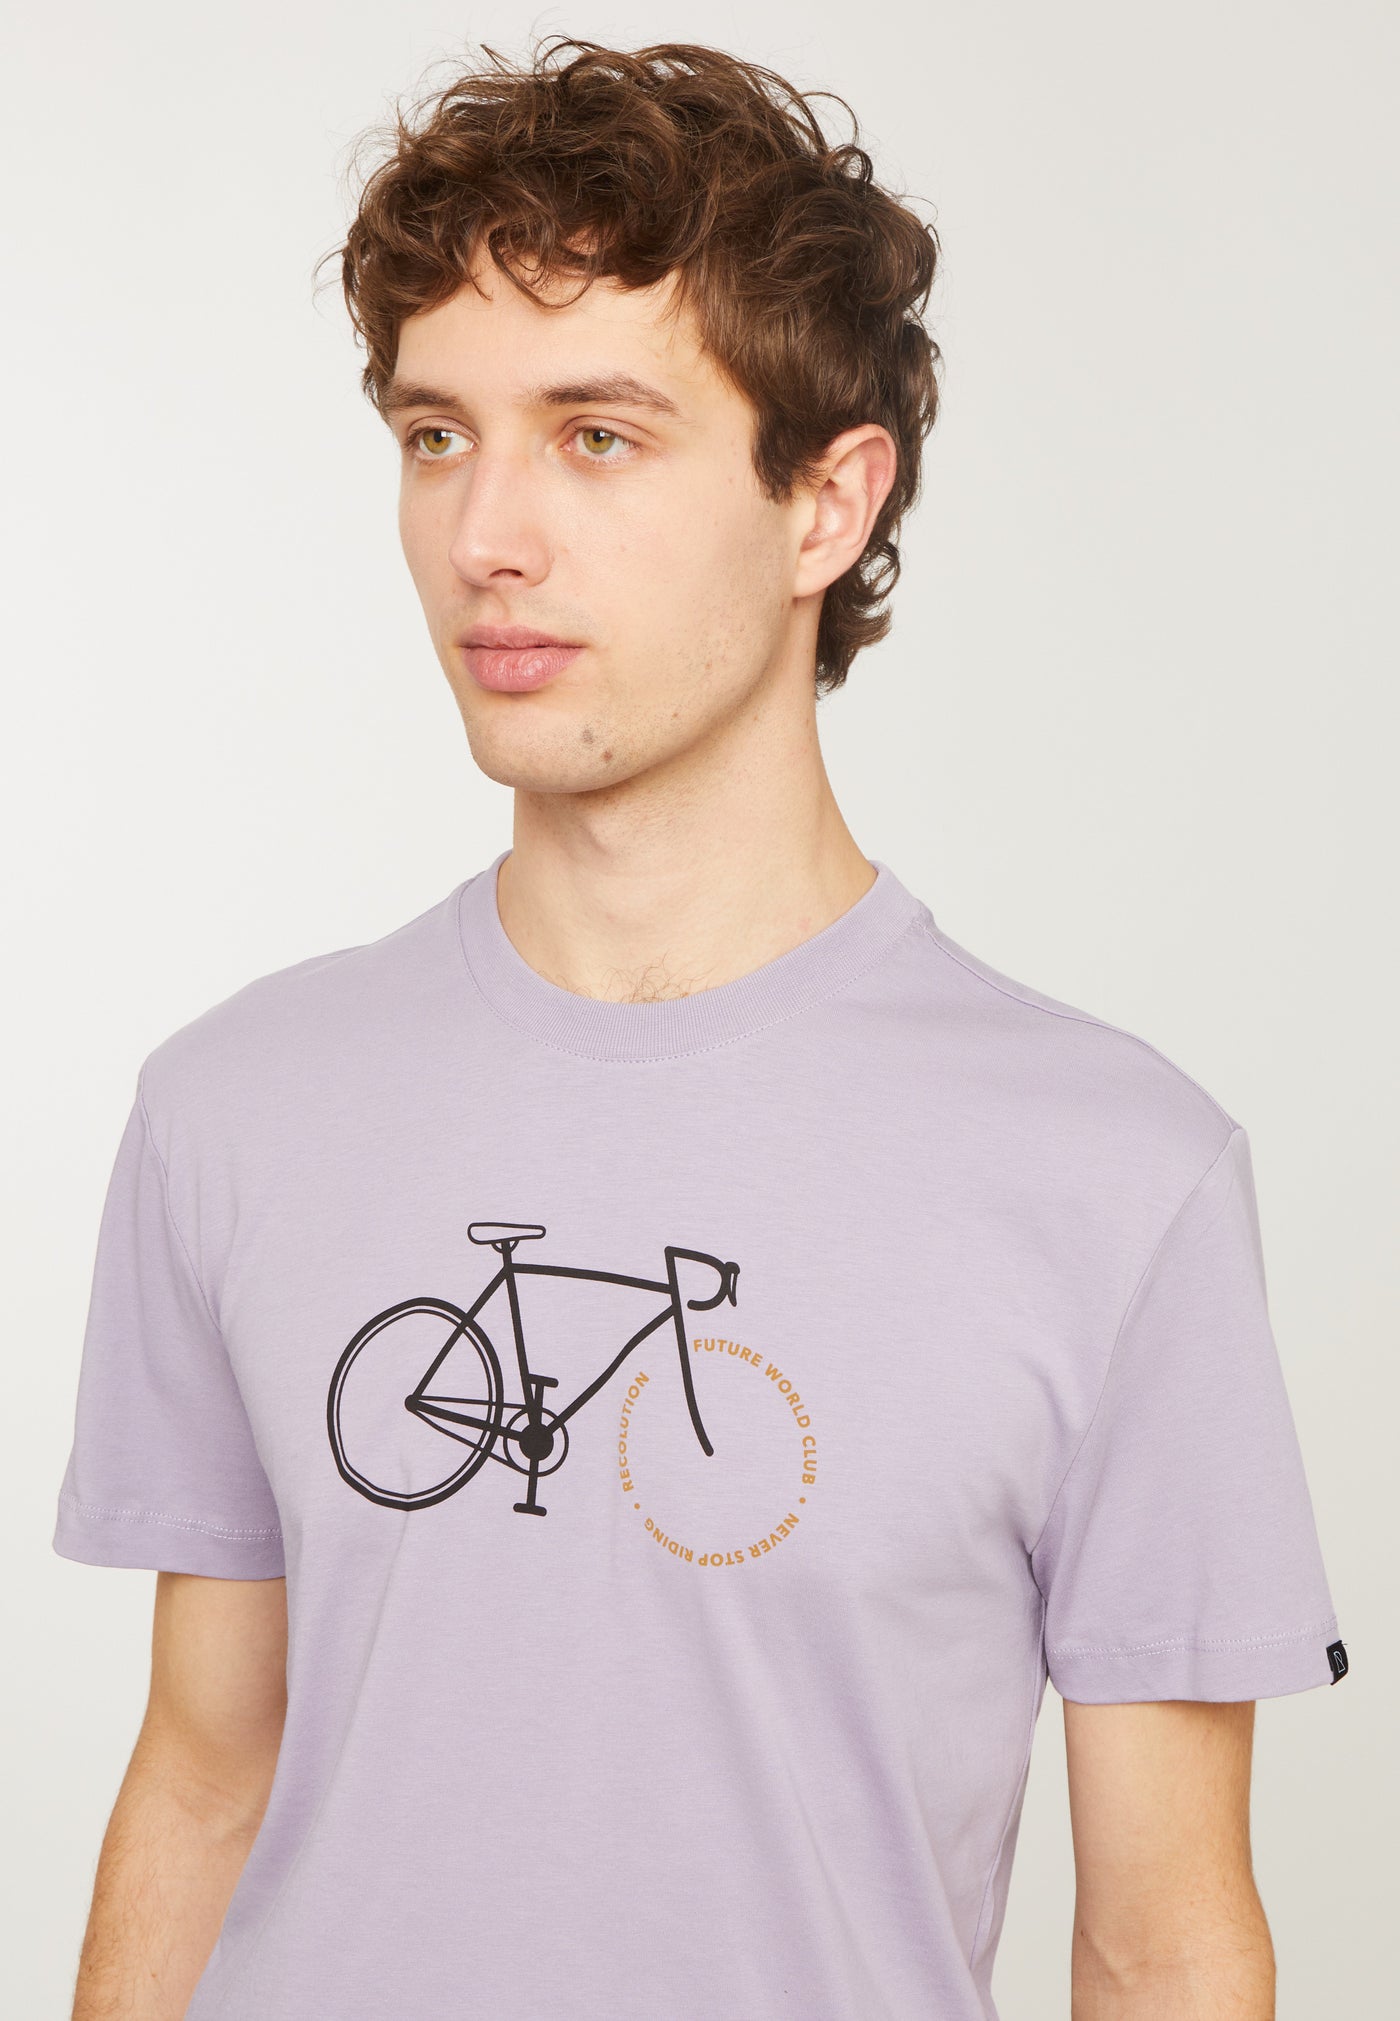 T-Shirt Agave Bike Letters Grey Lilac von Recolution.